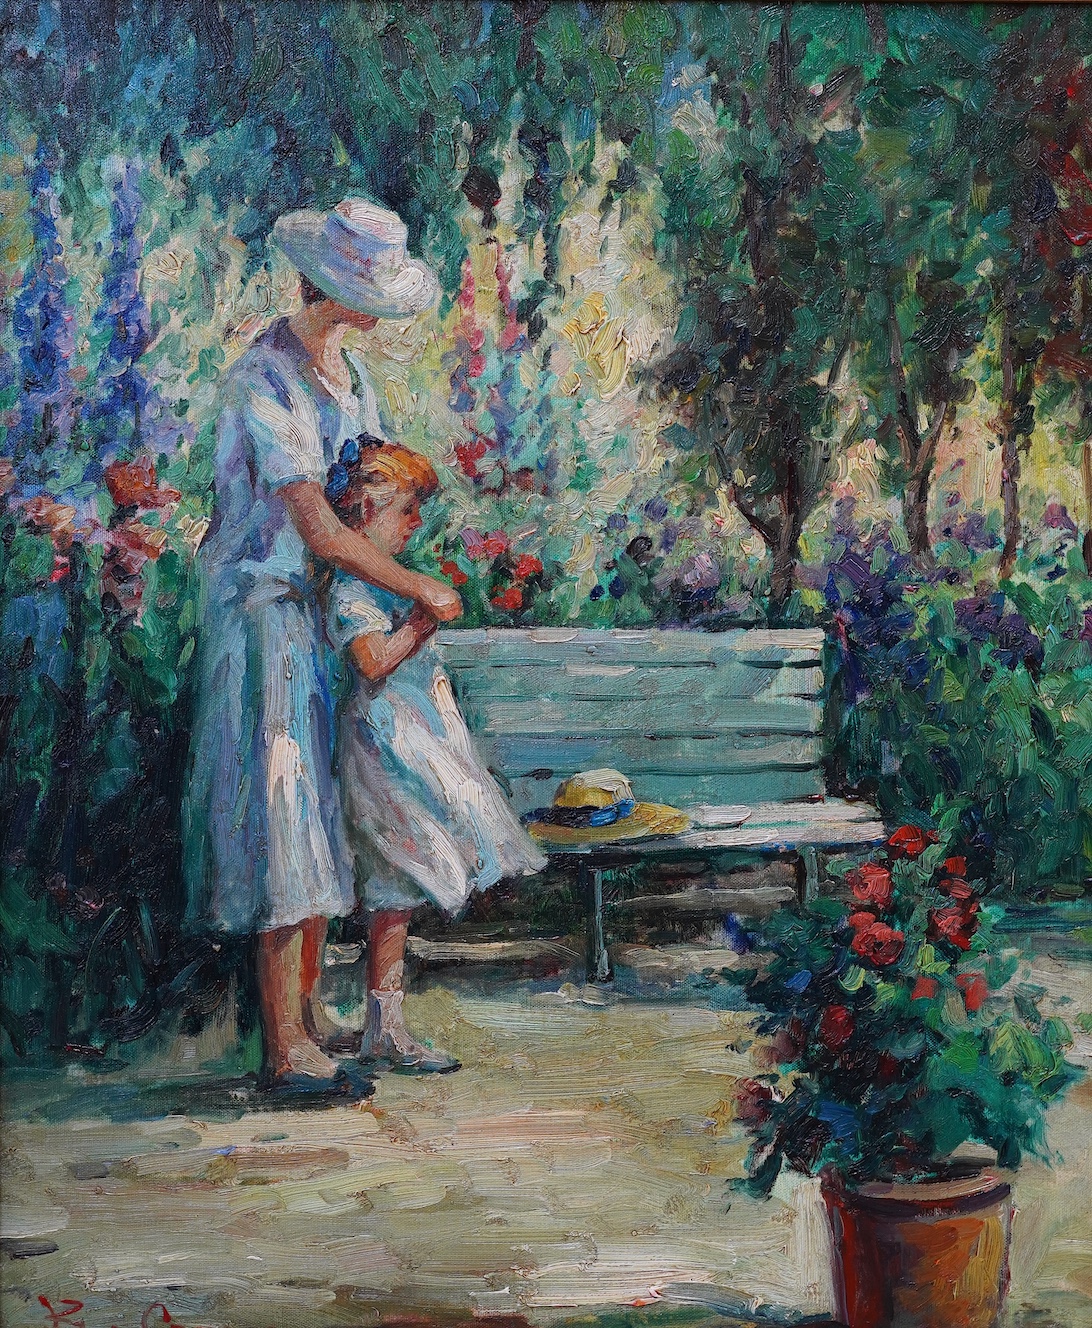 B. Crom?, oil on canvas, possibly over a print, Mother and daughter, signed, 58 x 49cm, ornate gilt frame